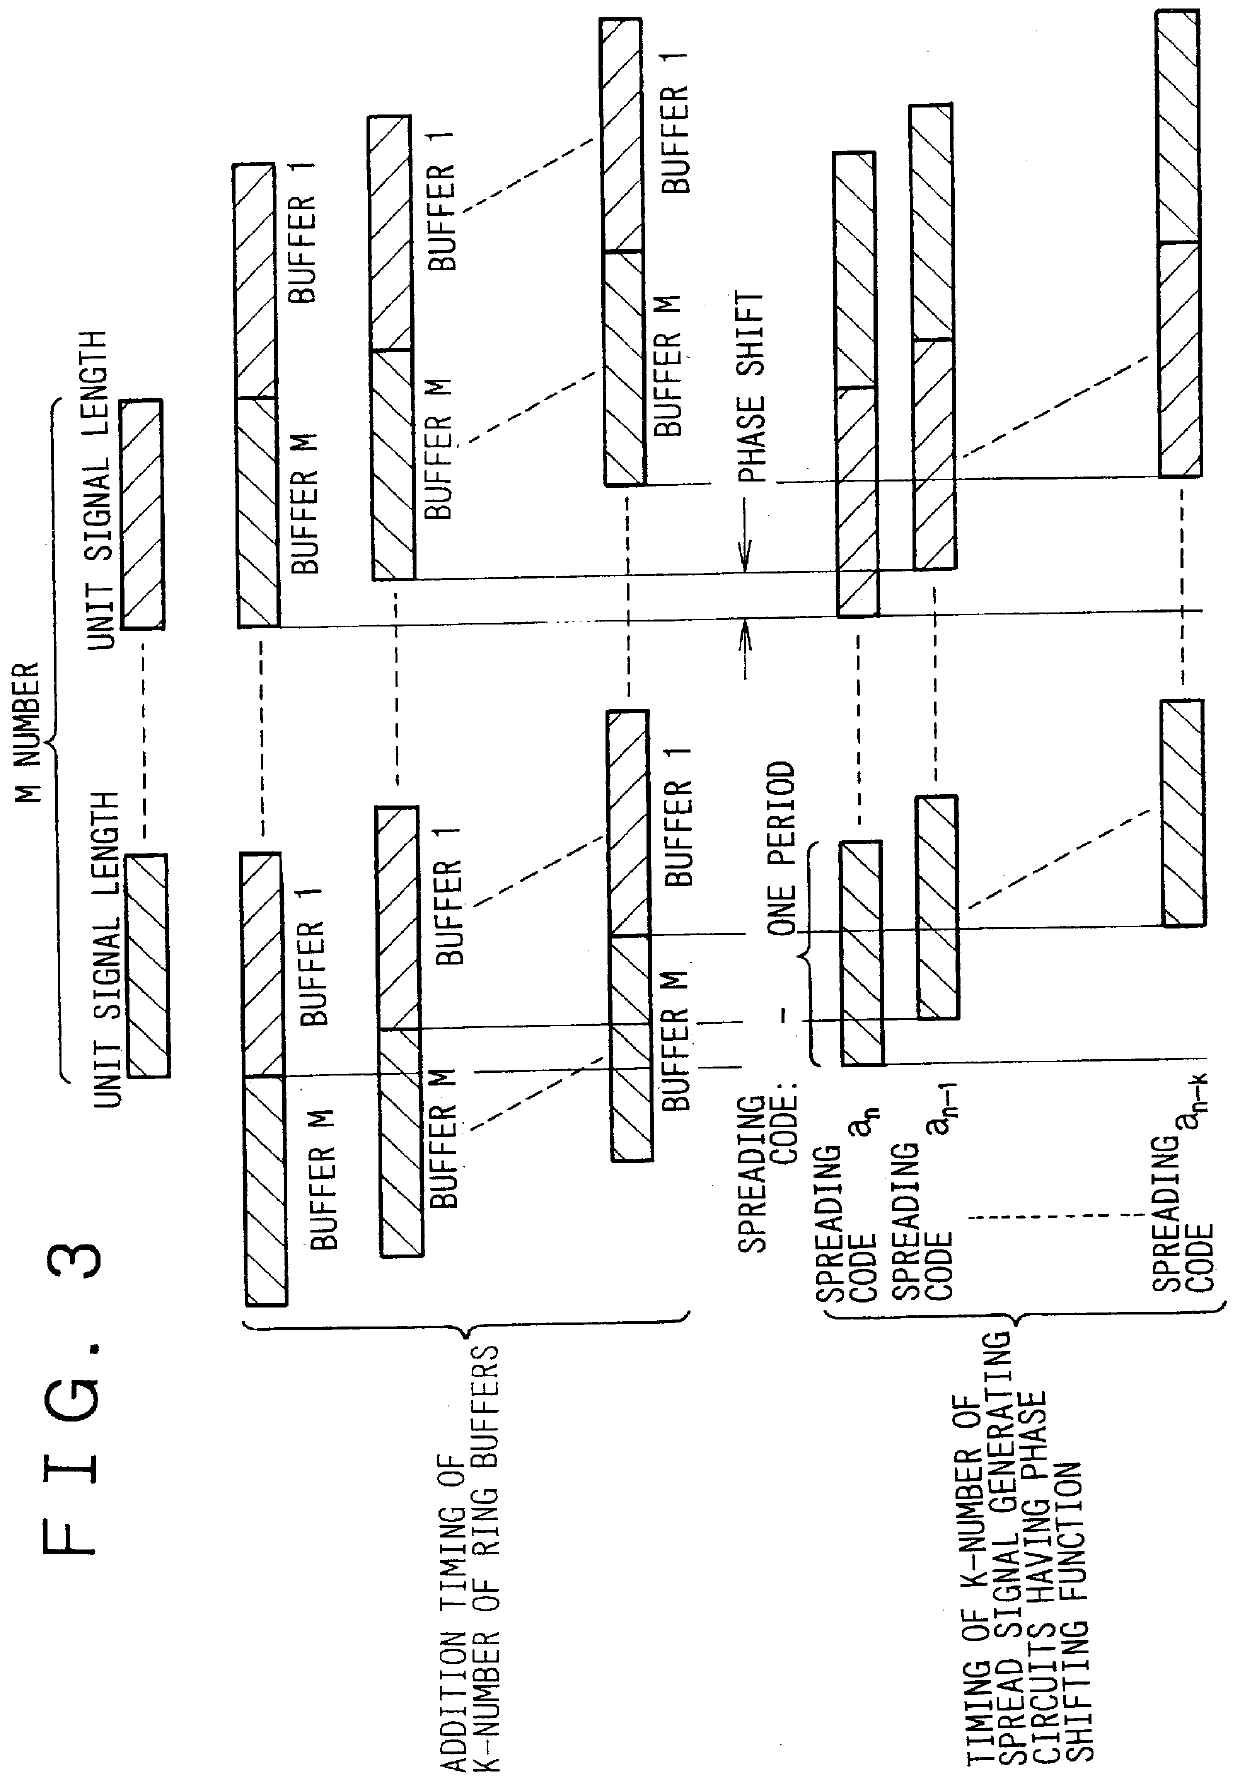 Cell search circuit for CDMA